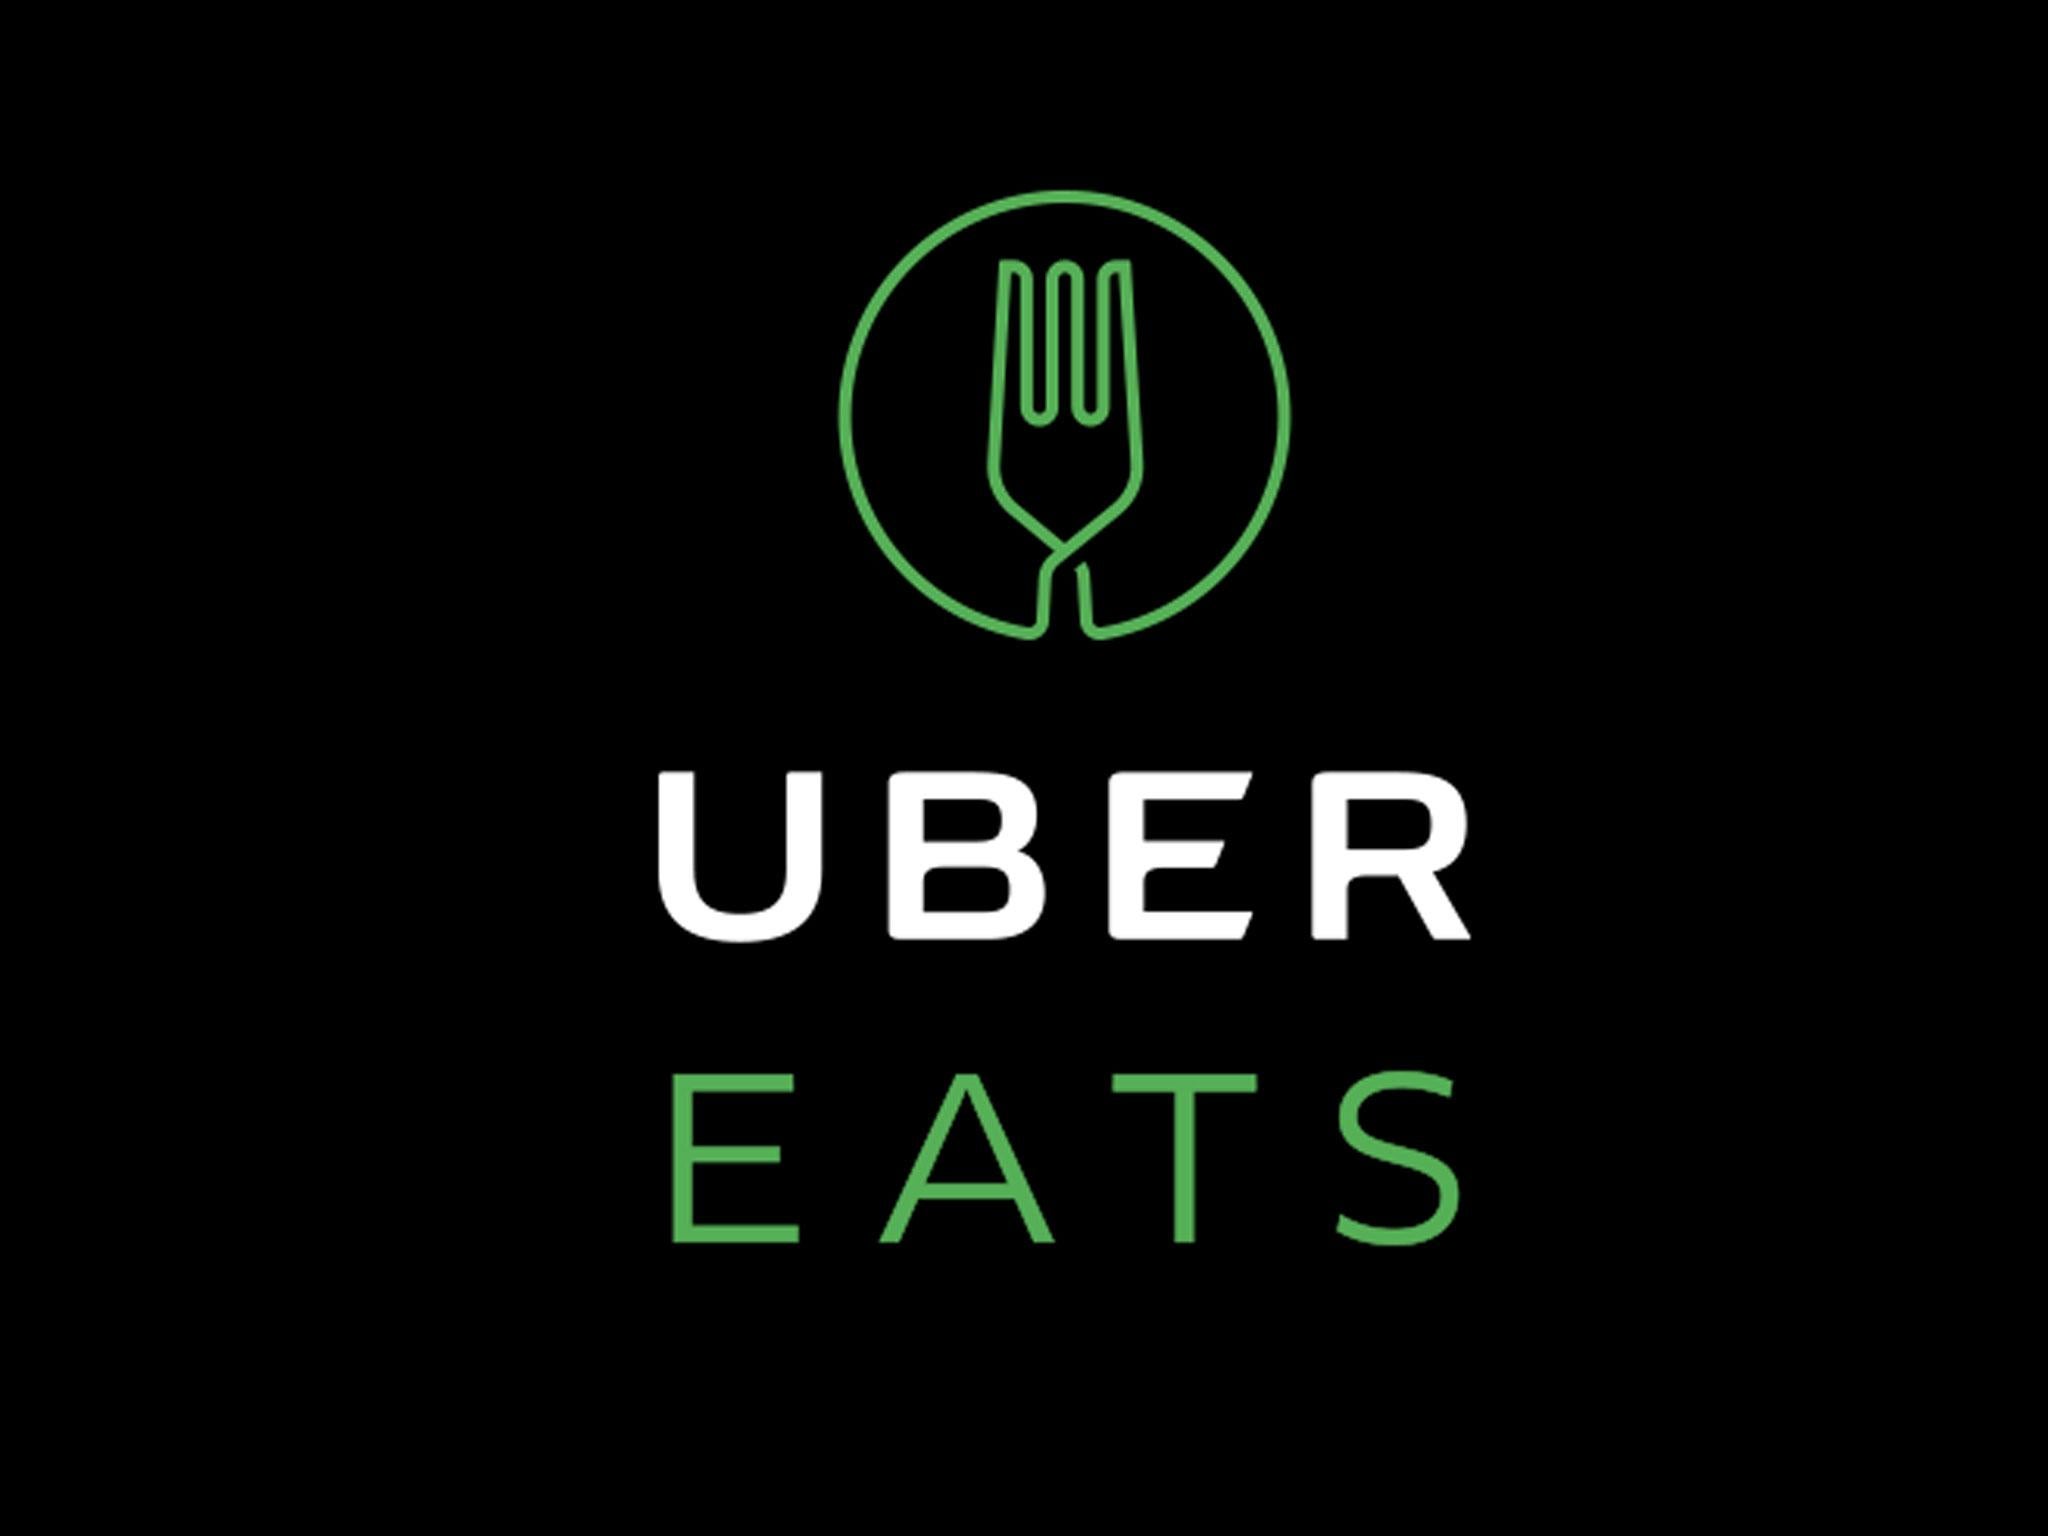 Police in Atlanta are hunting for an UberEATS driver